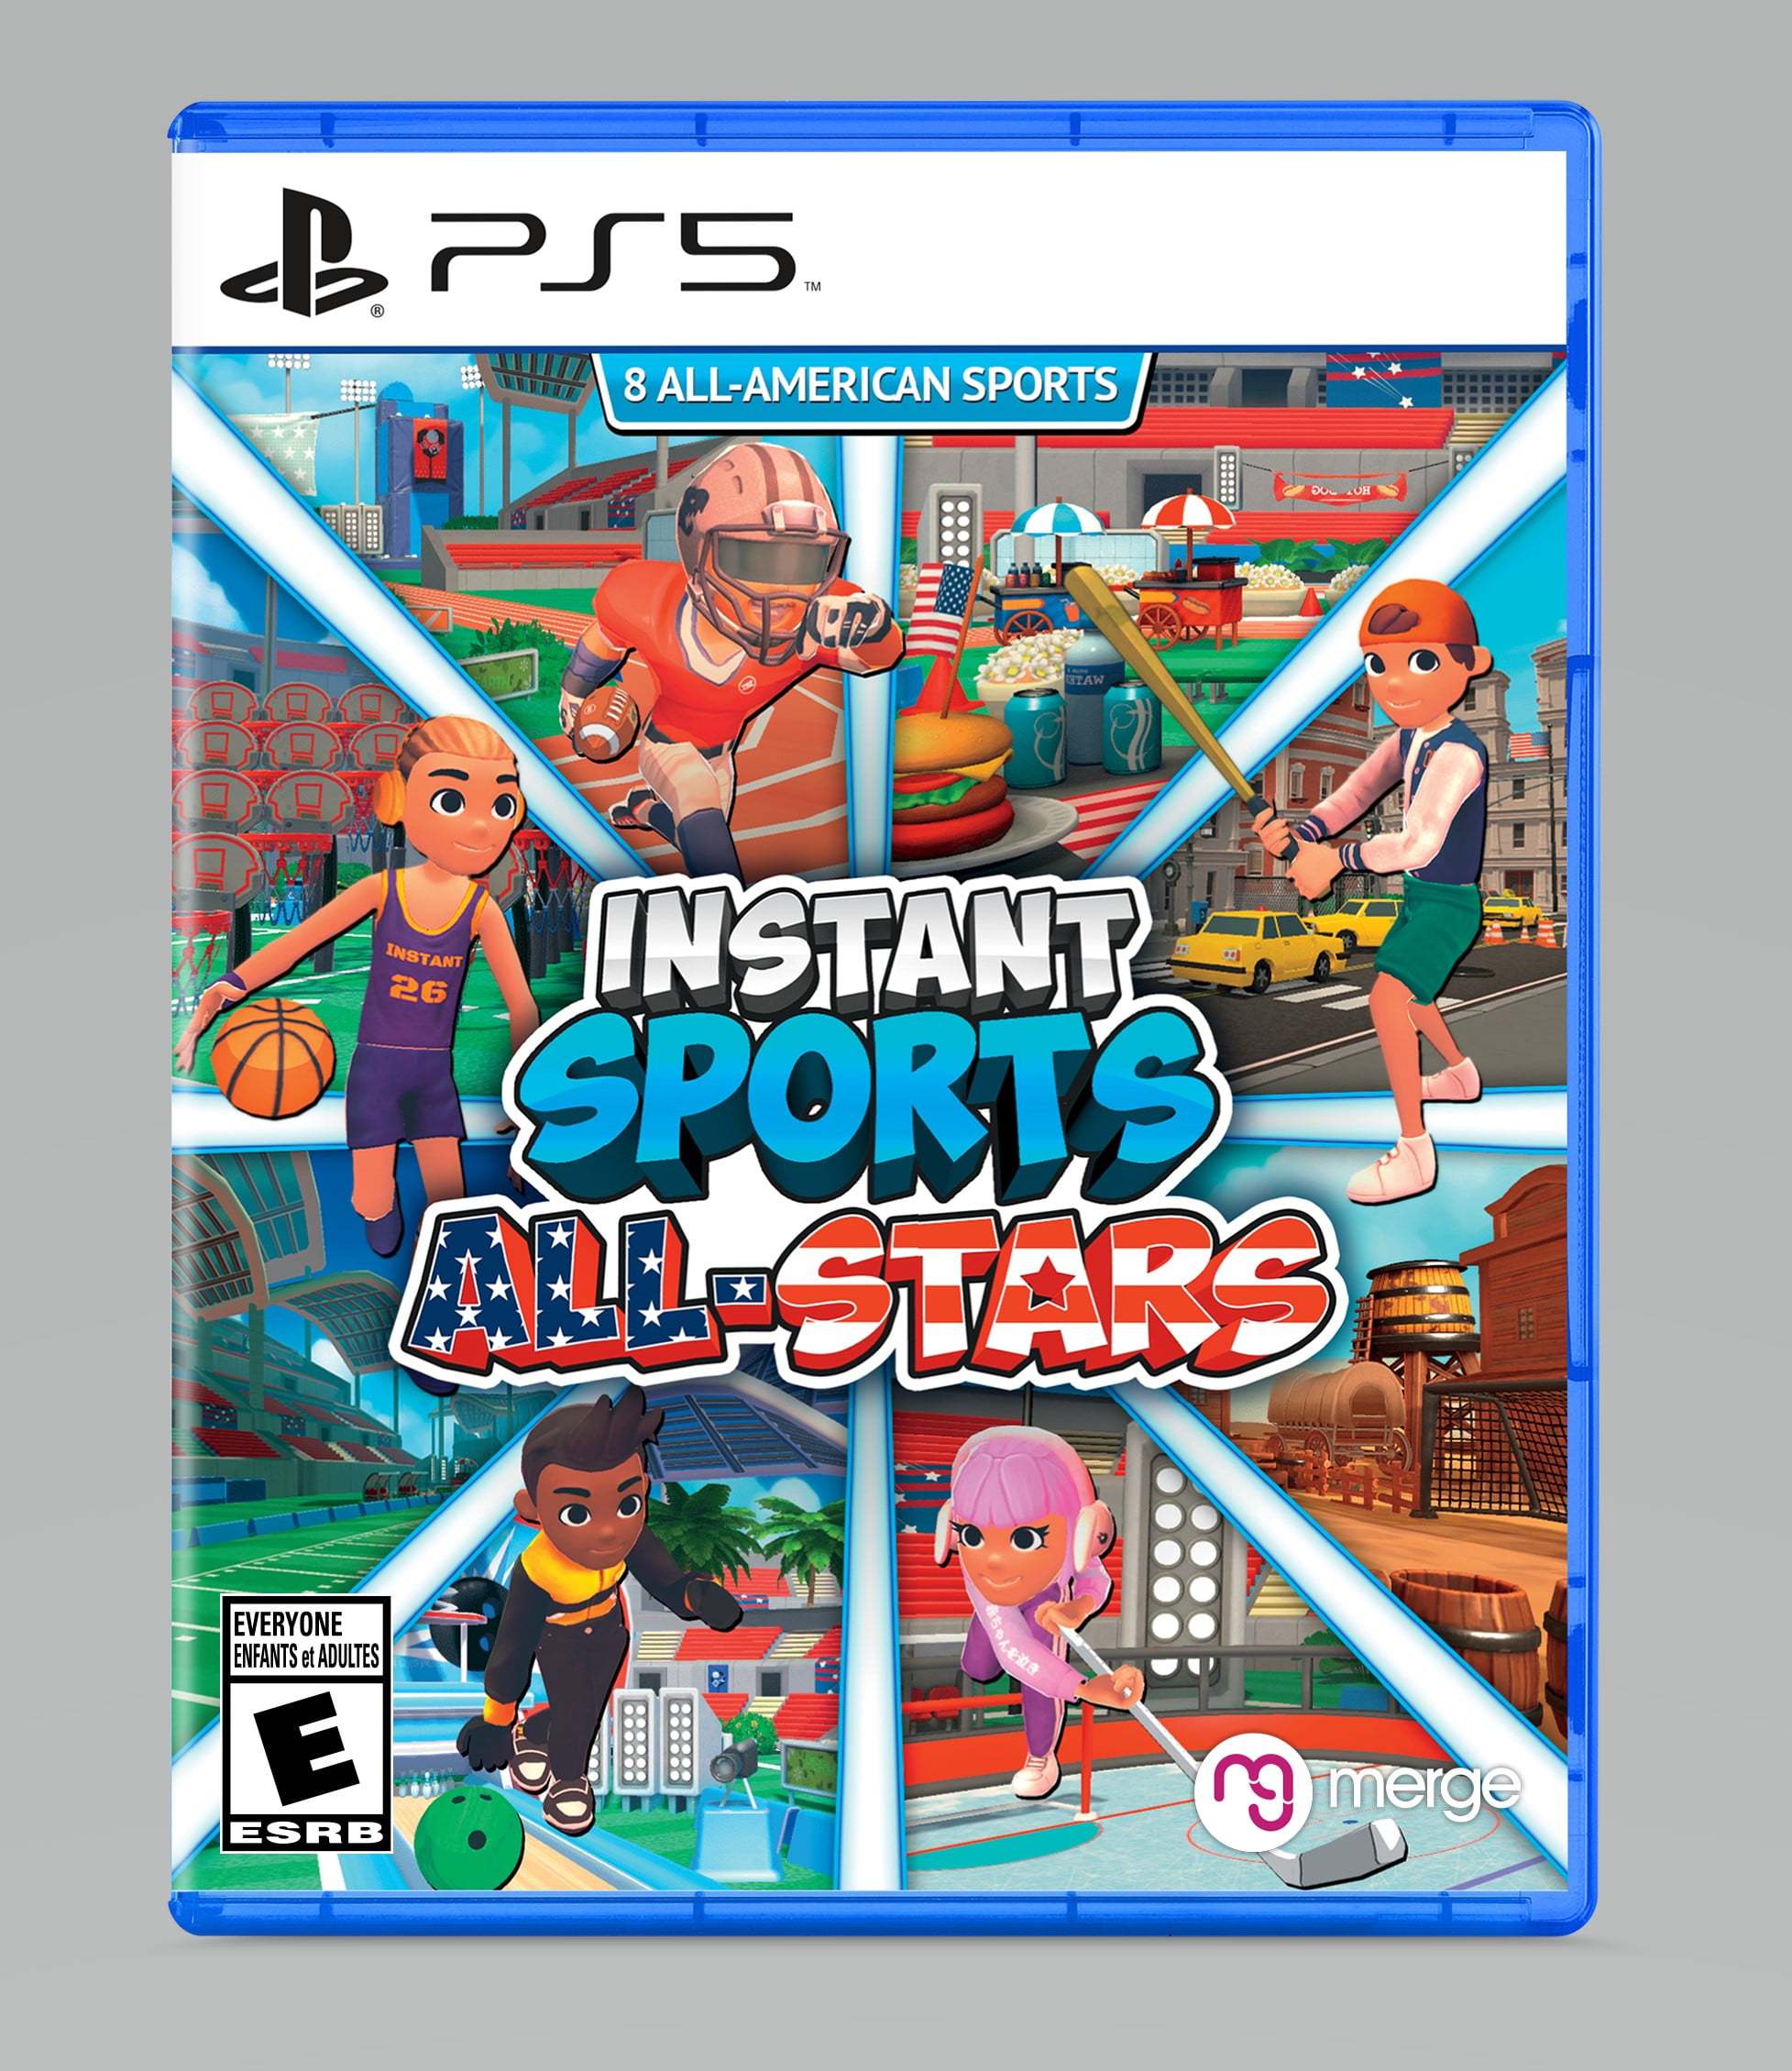 Instant Sports All Stars, 819335021310 5, Games, Merge PlayStation